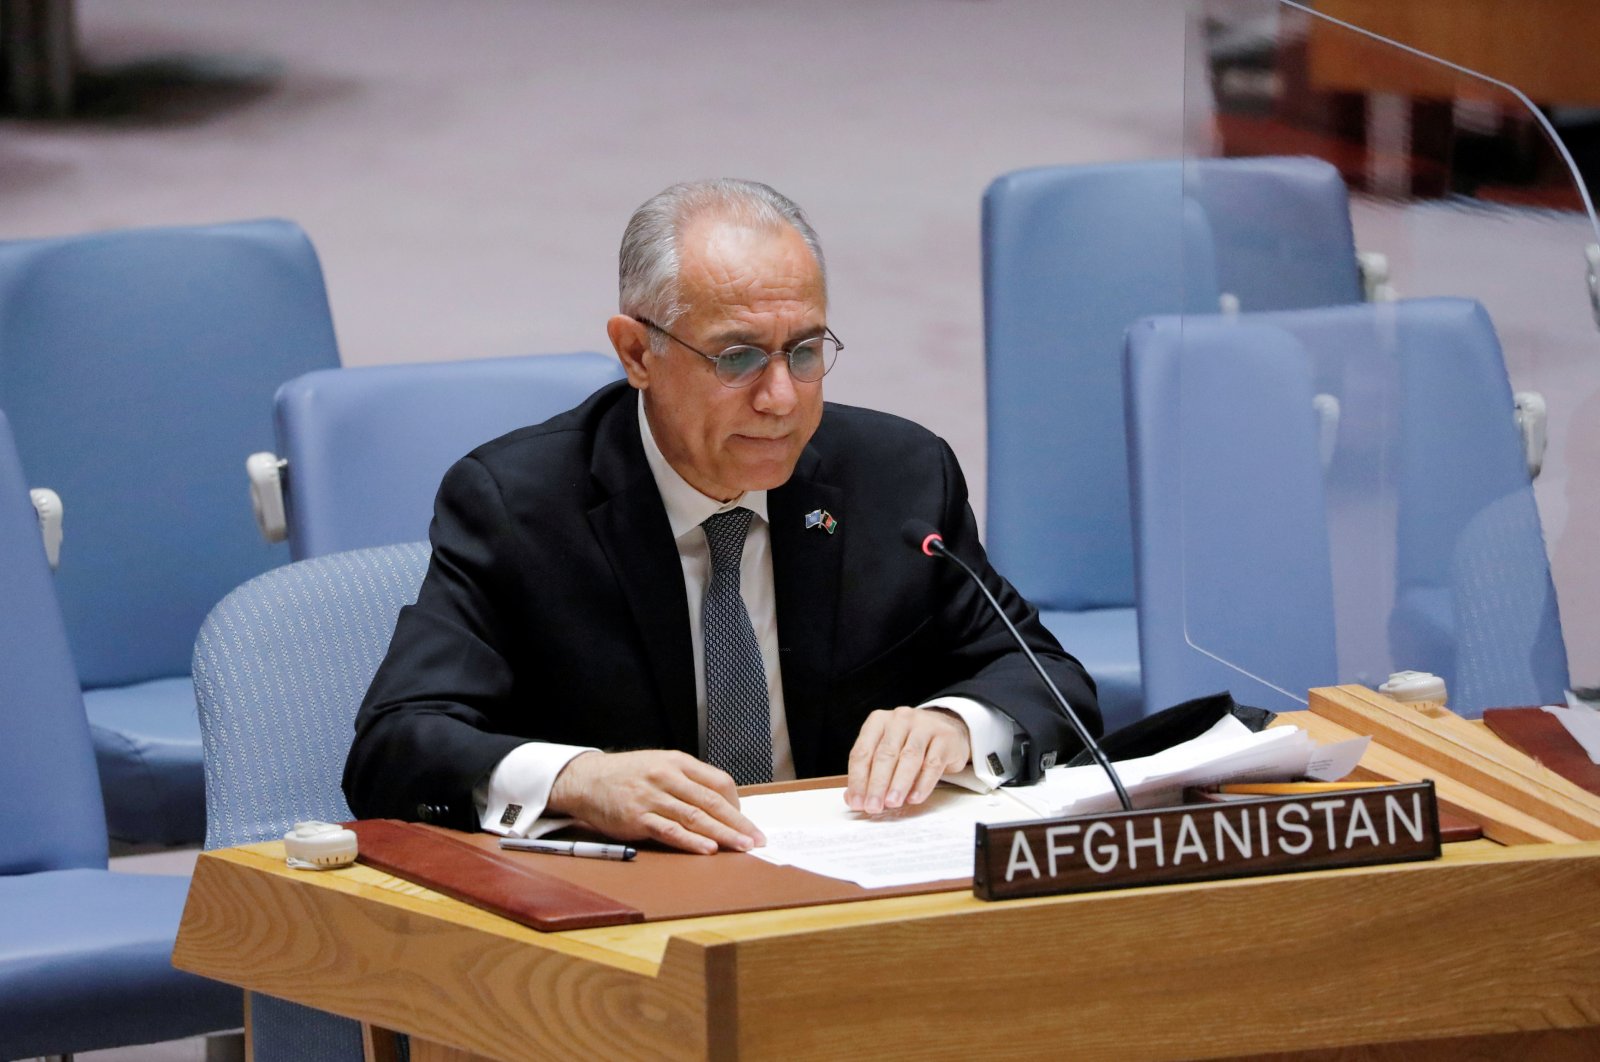 Afghanistan's U.N. ambassador Ghulam Isaczai addresses the United Nations Security Council regarding the situation in Afghanistan at the United Nations in New York City, New York, U.S., August 16, 2021. (Reuters Photo)